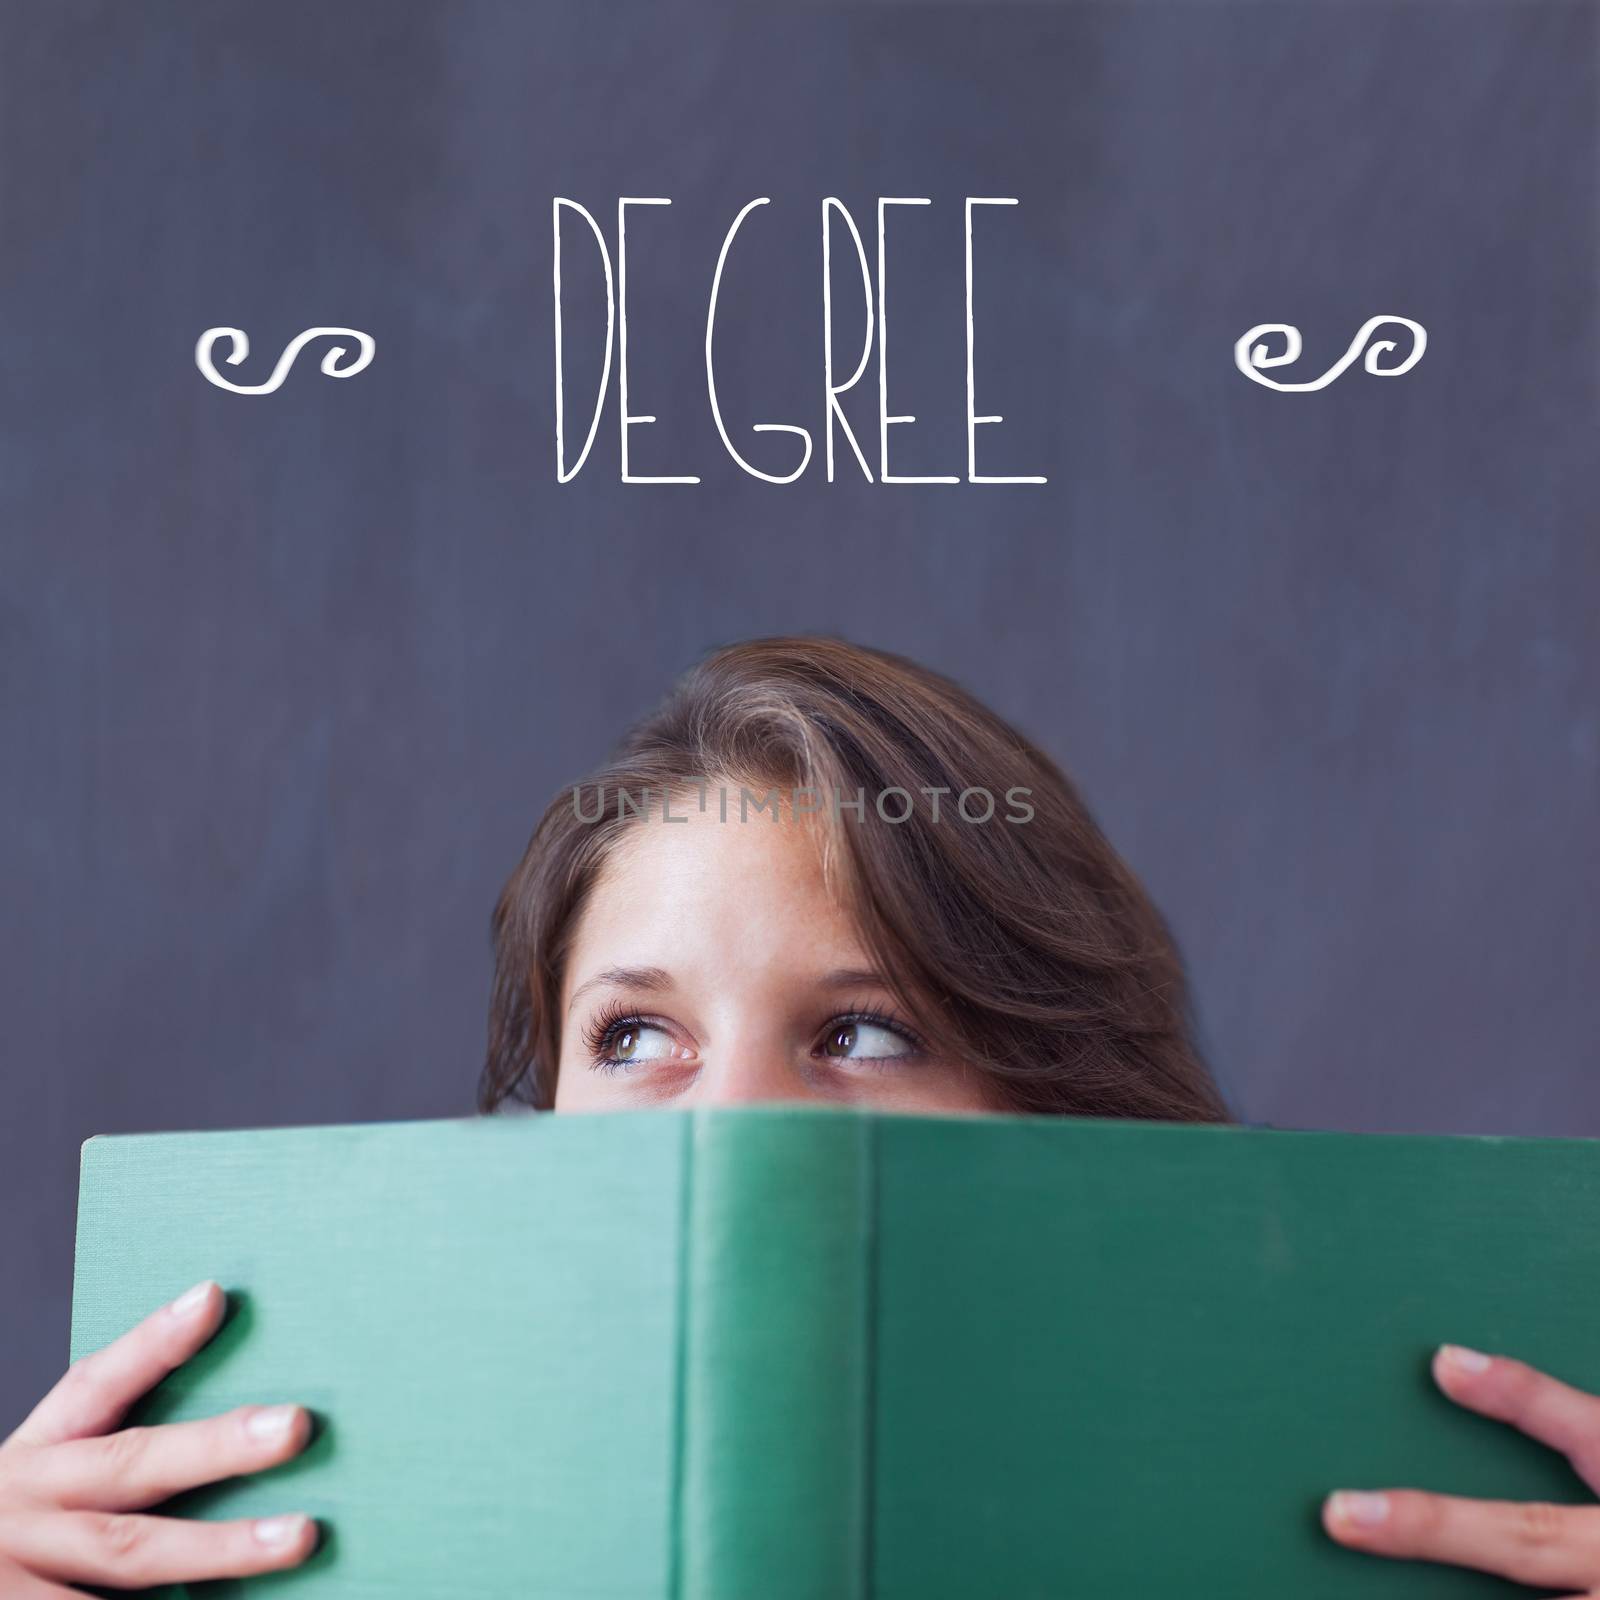 Degree against student holding book by Wavebreakmedia